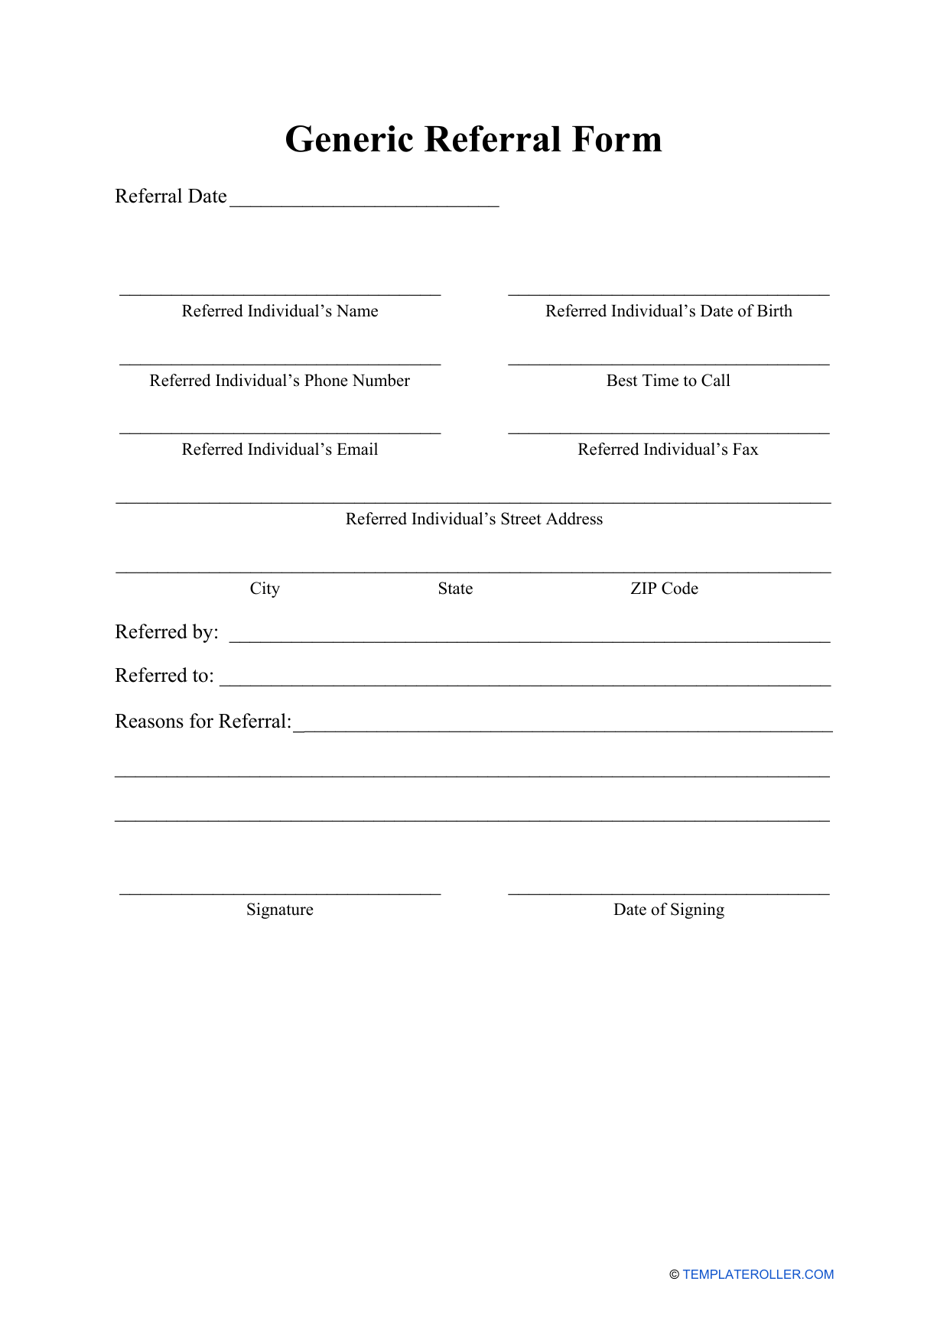 Generic Referral Form, Page 1